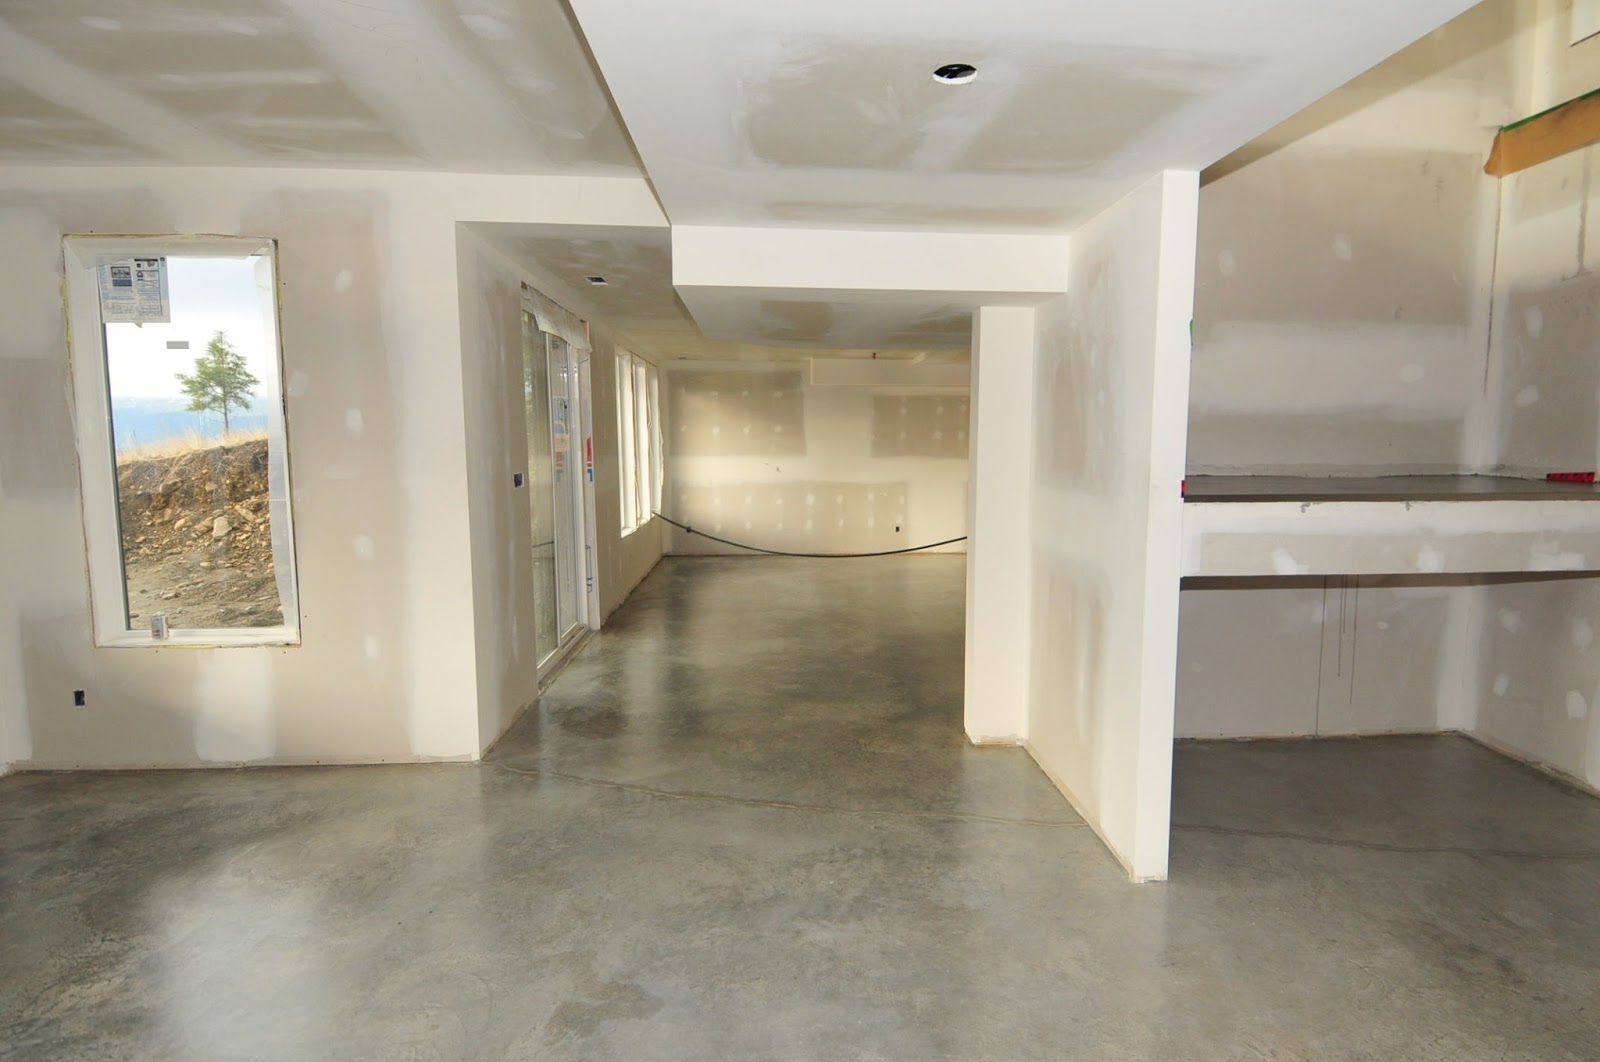 MODE CONCRETE Basement Concrete Floors Naturally Look Modern And